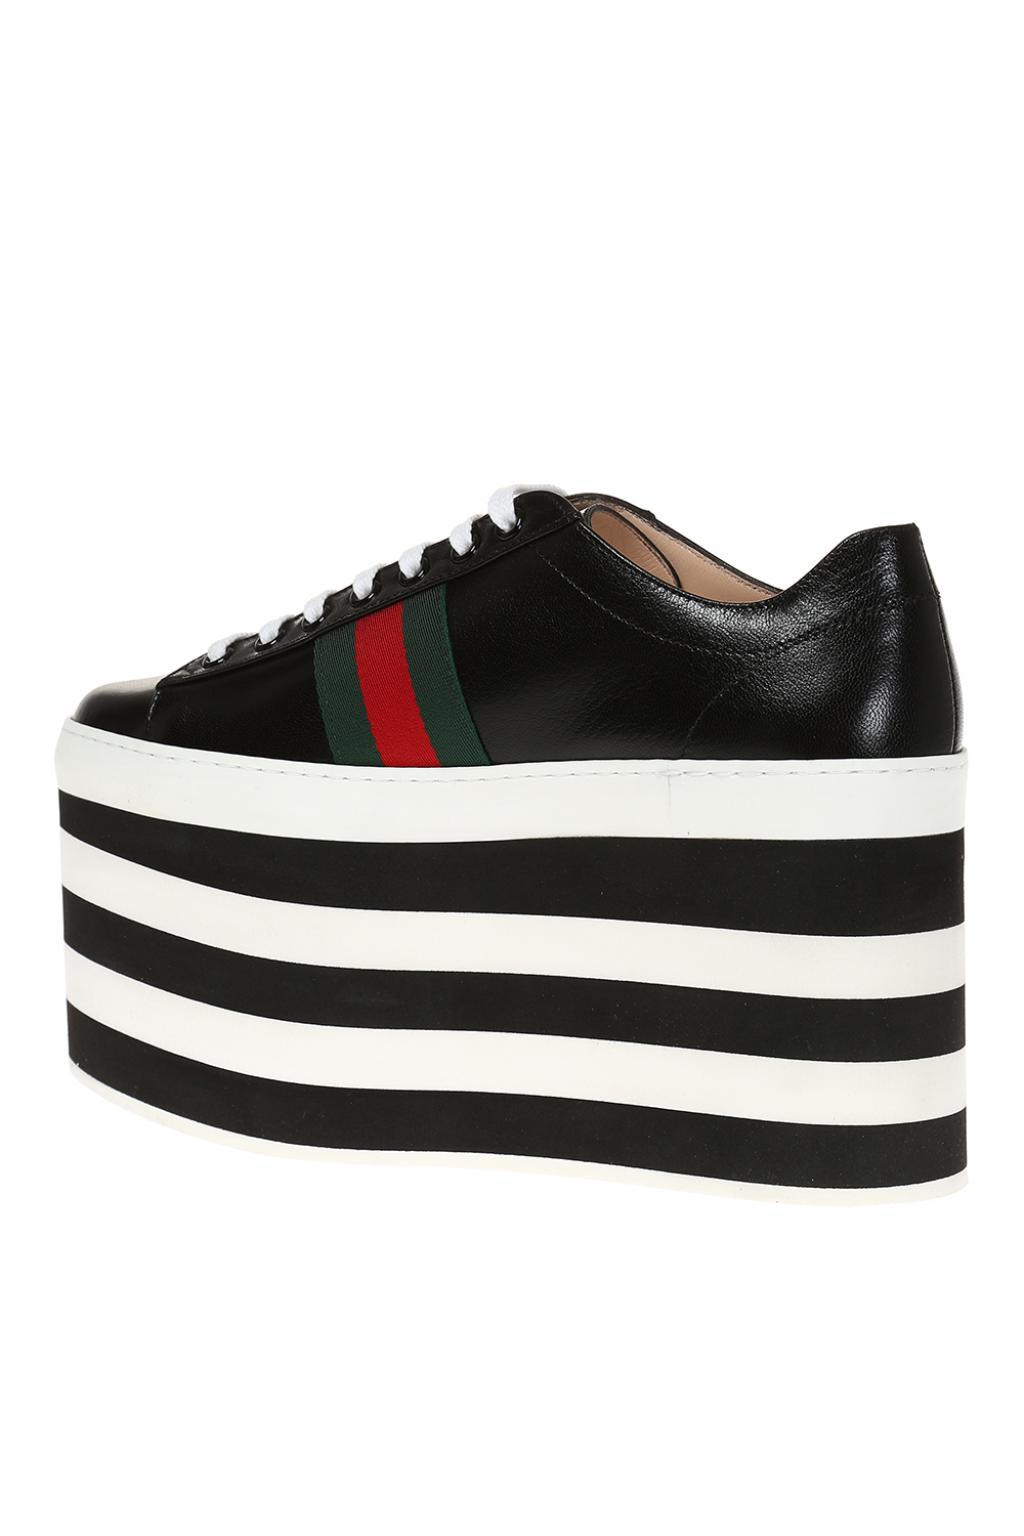 Gucci Leather High Platform Sneakers in Black - Lyst